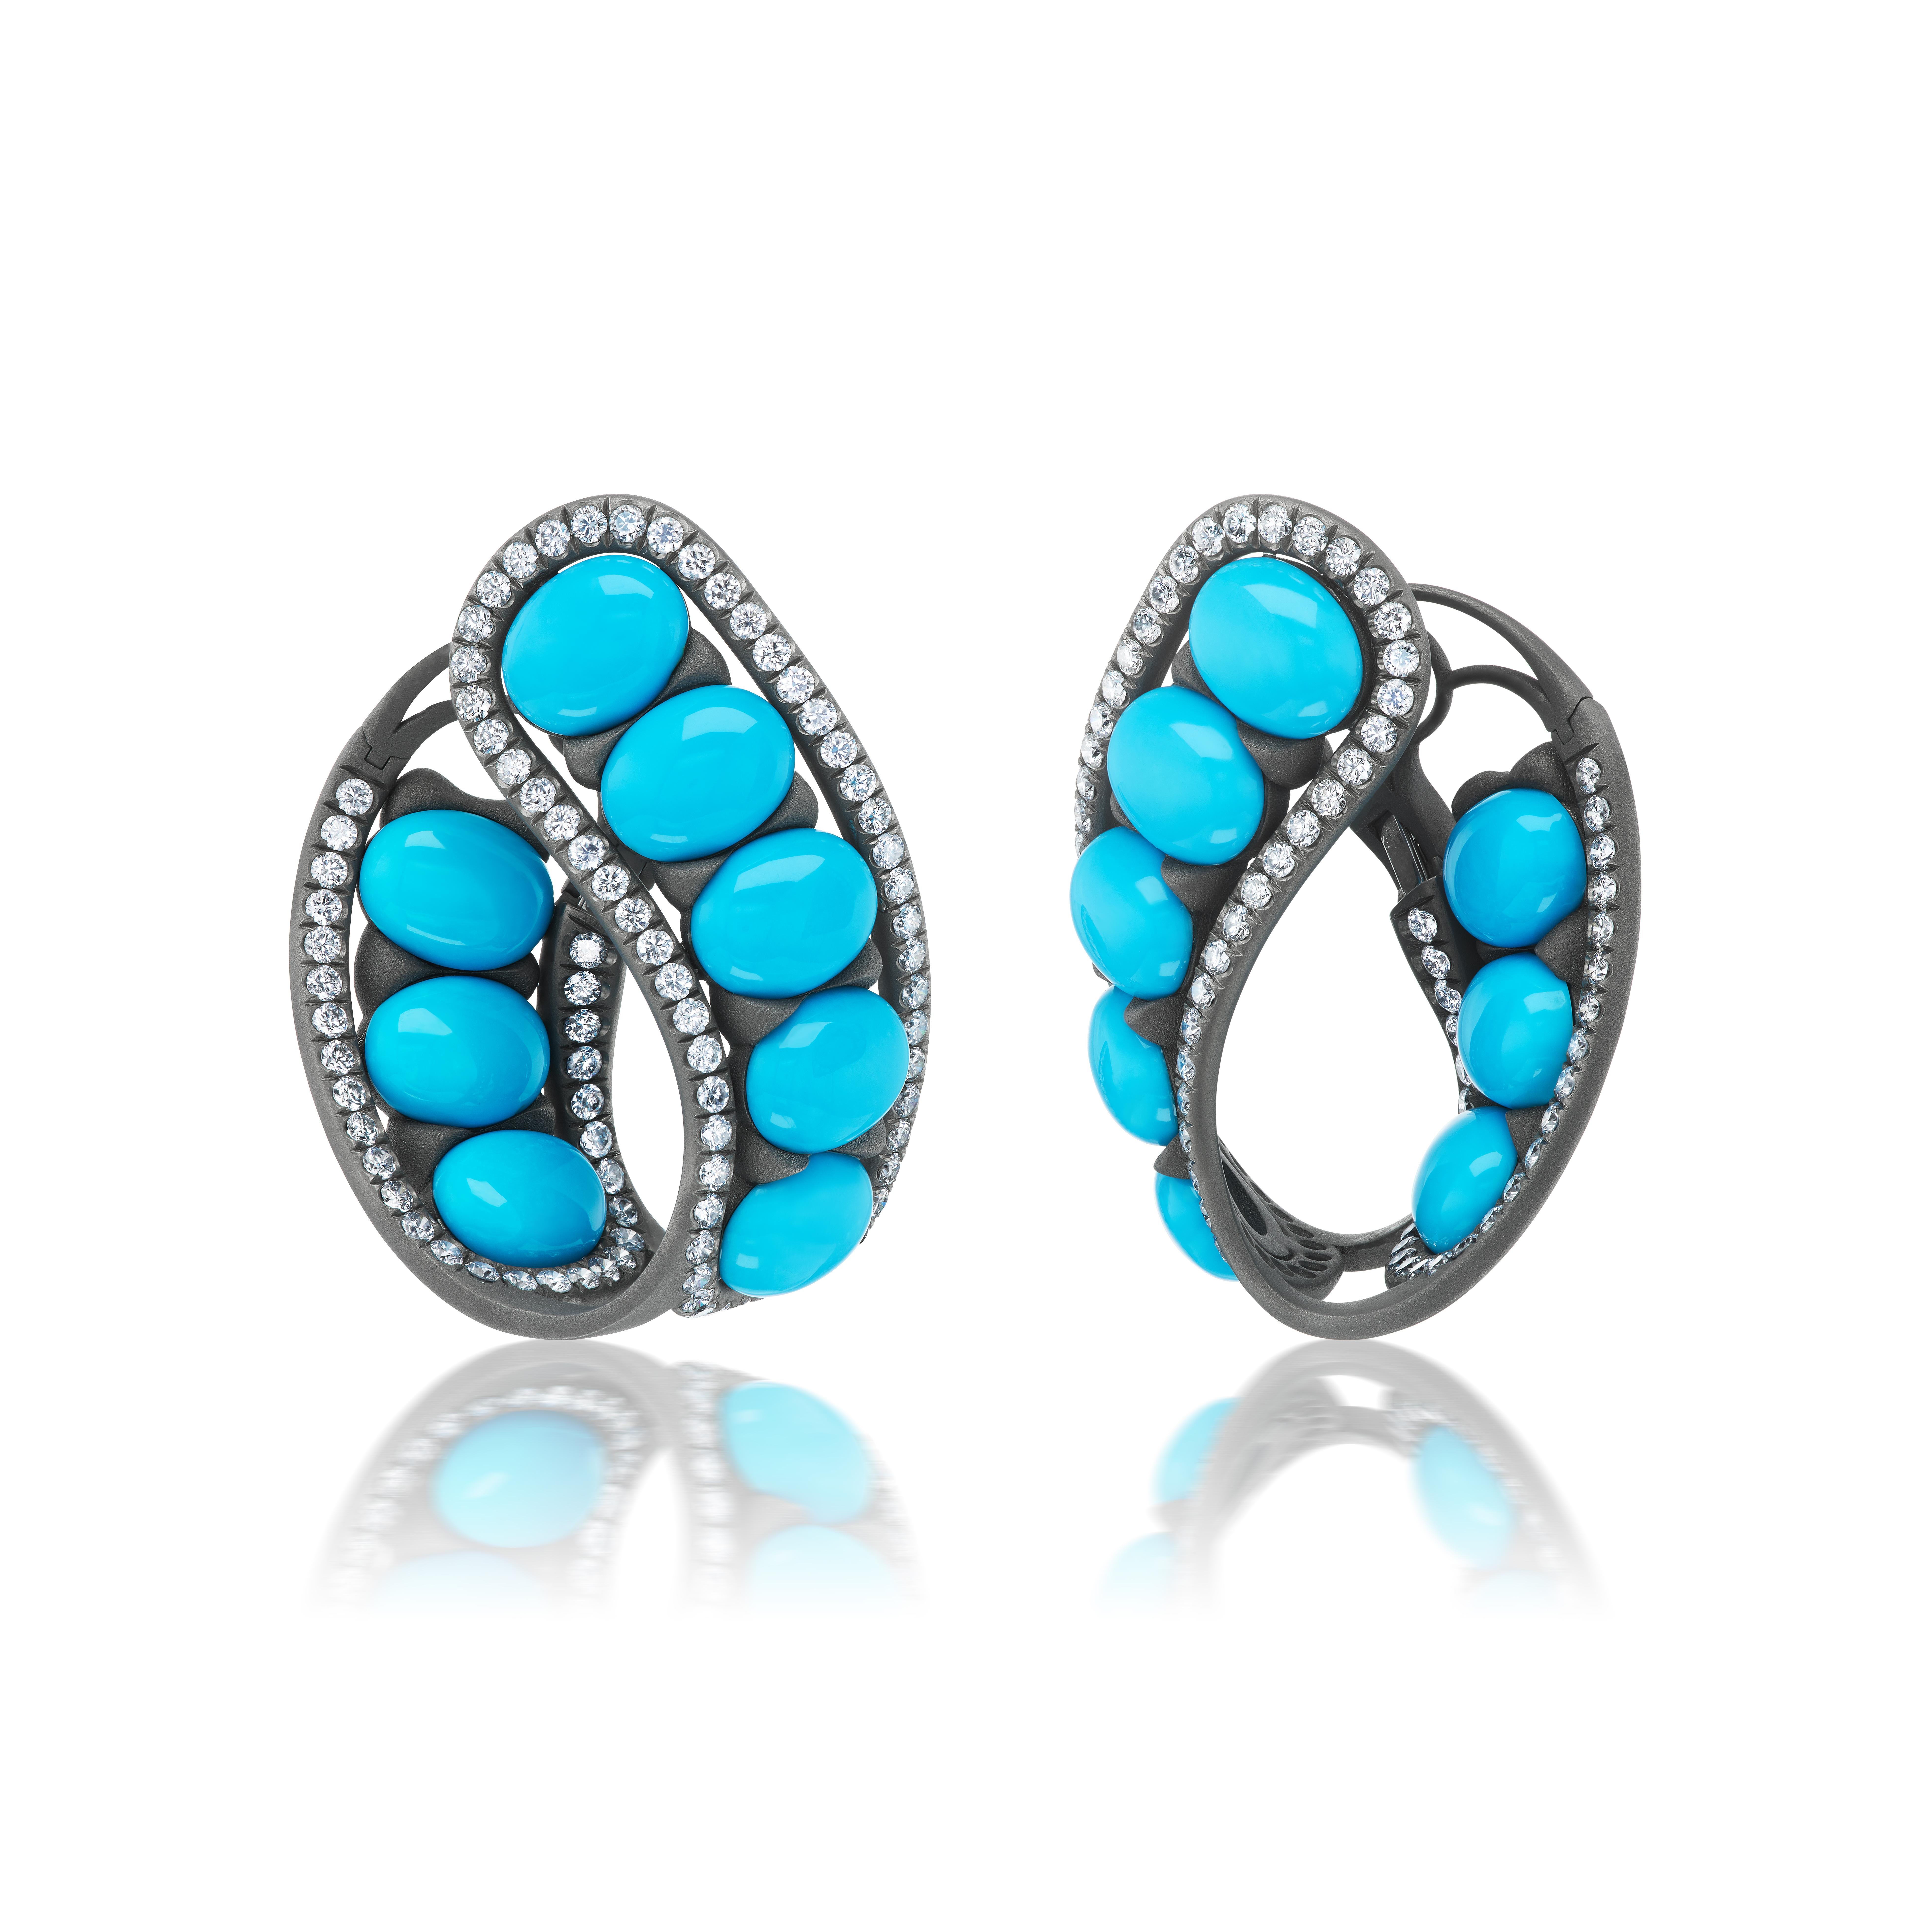 A bold and striking design, featuring bright blue Sleeping Beauty turquoise, framed with diamonds and mounted in brushed grey titanium.   At a full 1 1/2 x 1 1/4 inches these are definitely statement earrings, however the use of titanium makes them